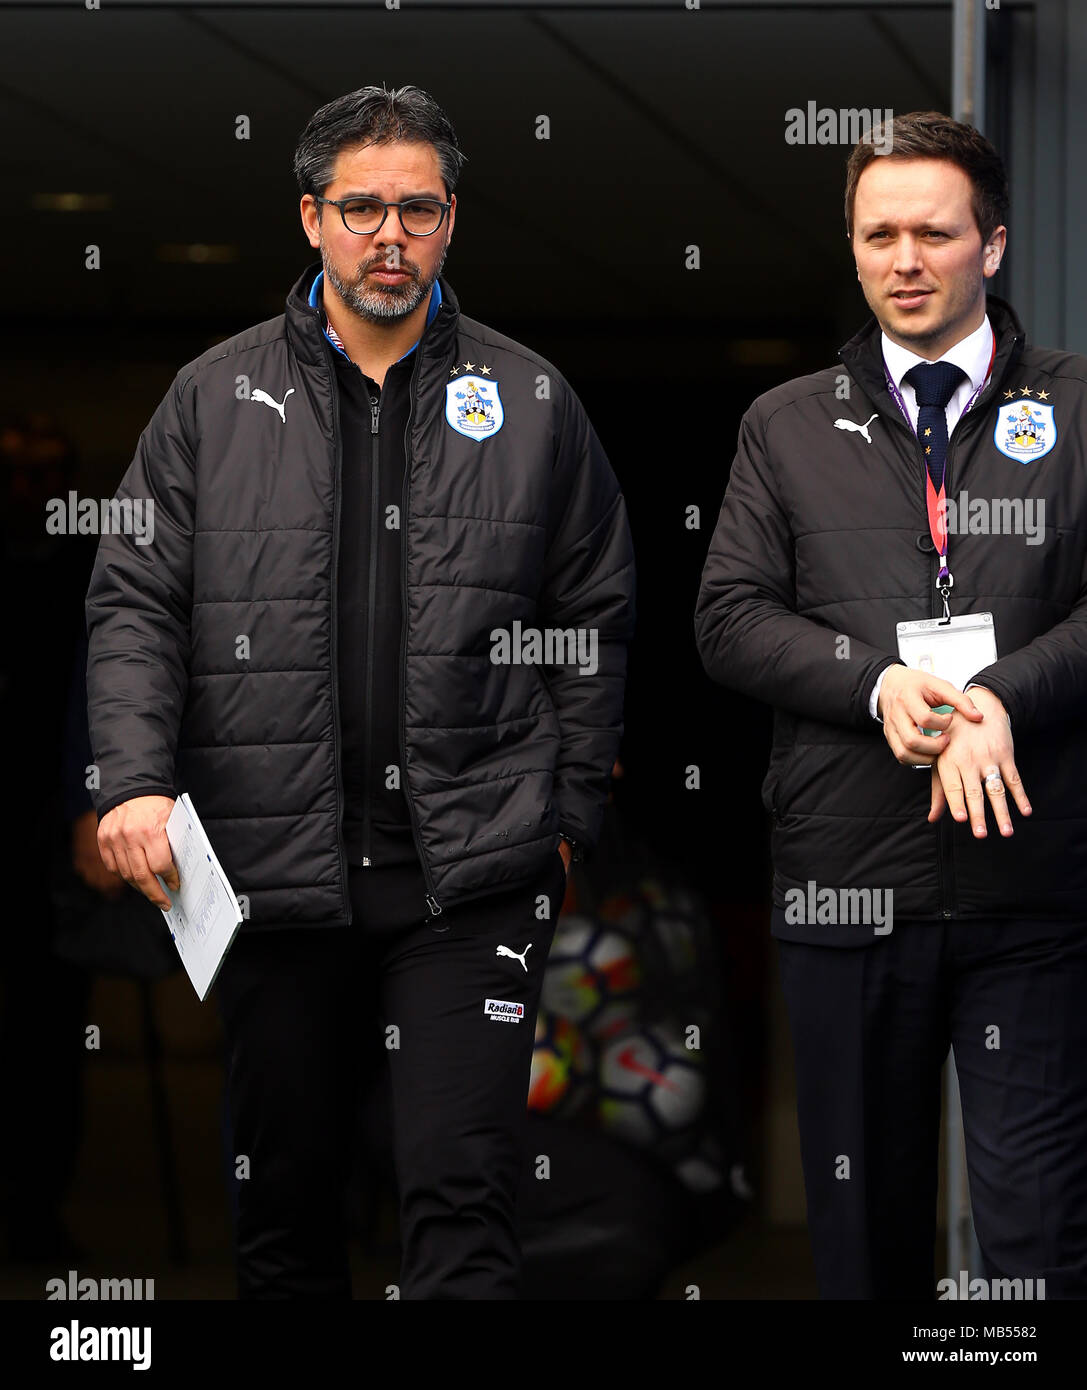 Huddersfield Town manager David Wagner before the Premier League match at the AMEX Stadium, Brighton. PRESS ASSOCIATION Photo. Picture date: Saturday April 7, 2018. See PA story SOCCER Brighton. Photo credit should read: Gareth Fuller/PA Wire. RESTRICTIONS: No use with unauthorised audio, video, data, fixture lists, club/league logos or 'live' services. Online in-match use limited to 75 images, no video emulation. No use in betting, games or single club/league/player publications. Stock Photo